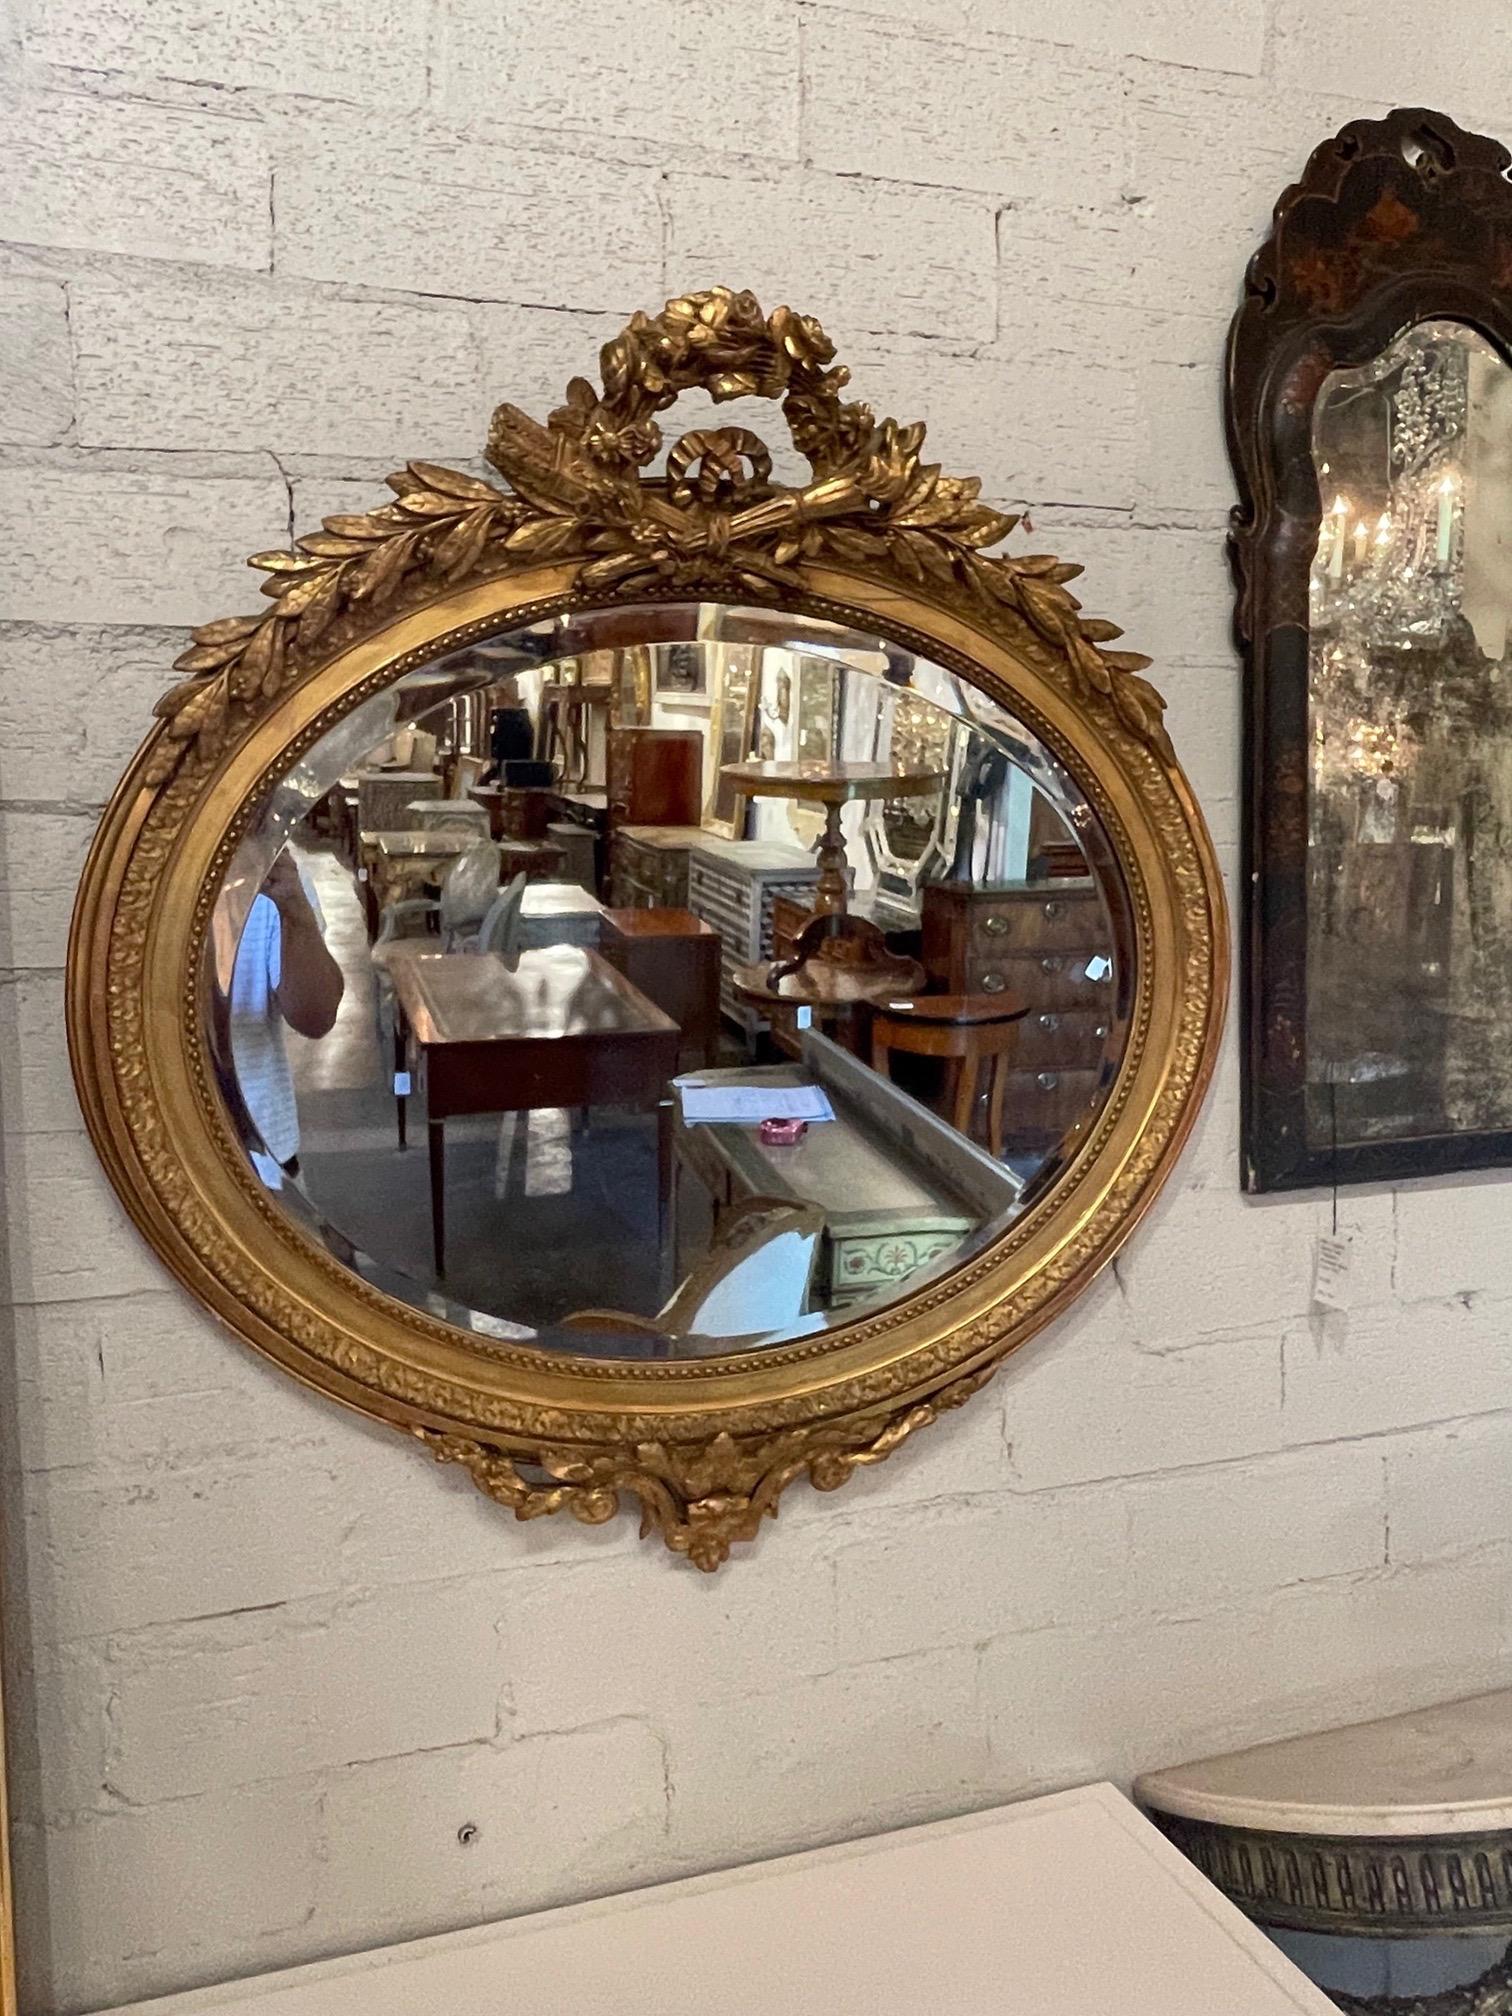 Exquisite 19th century French Louis XVI oval giltwood beveled mirror. Exceptional carving on this mirror. Makes an impressive statement!